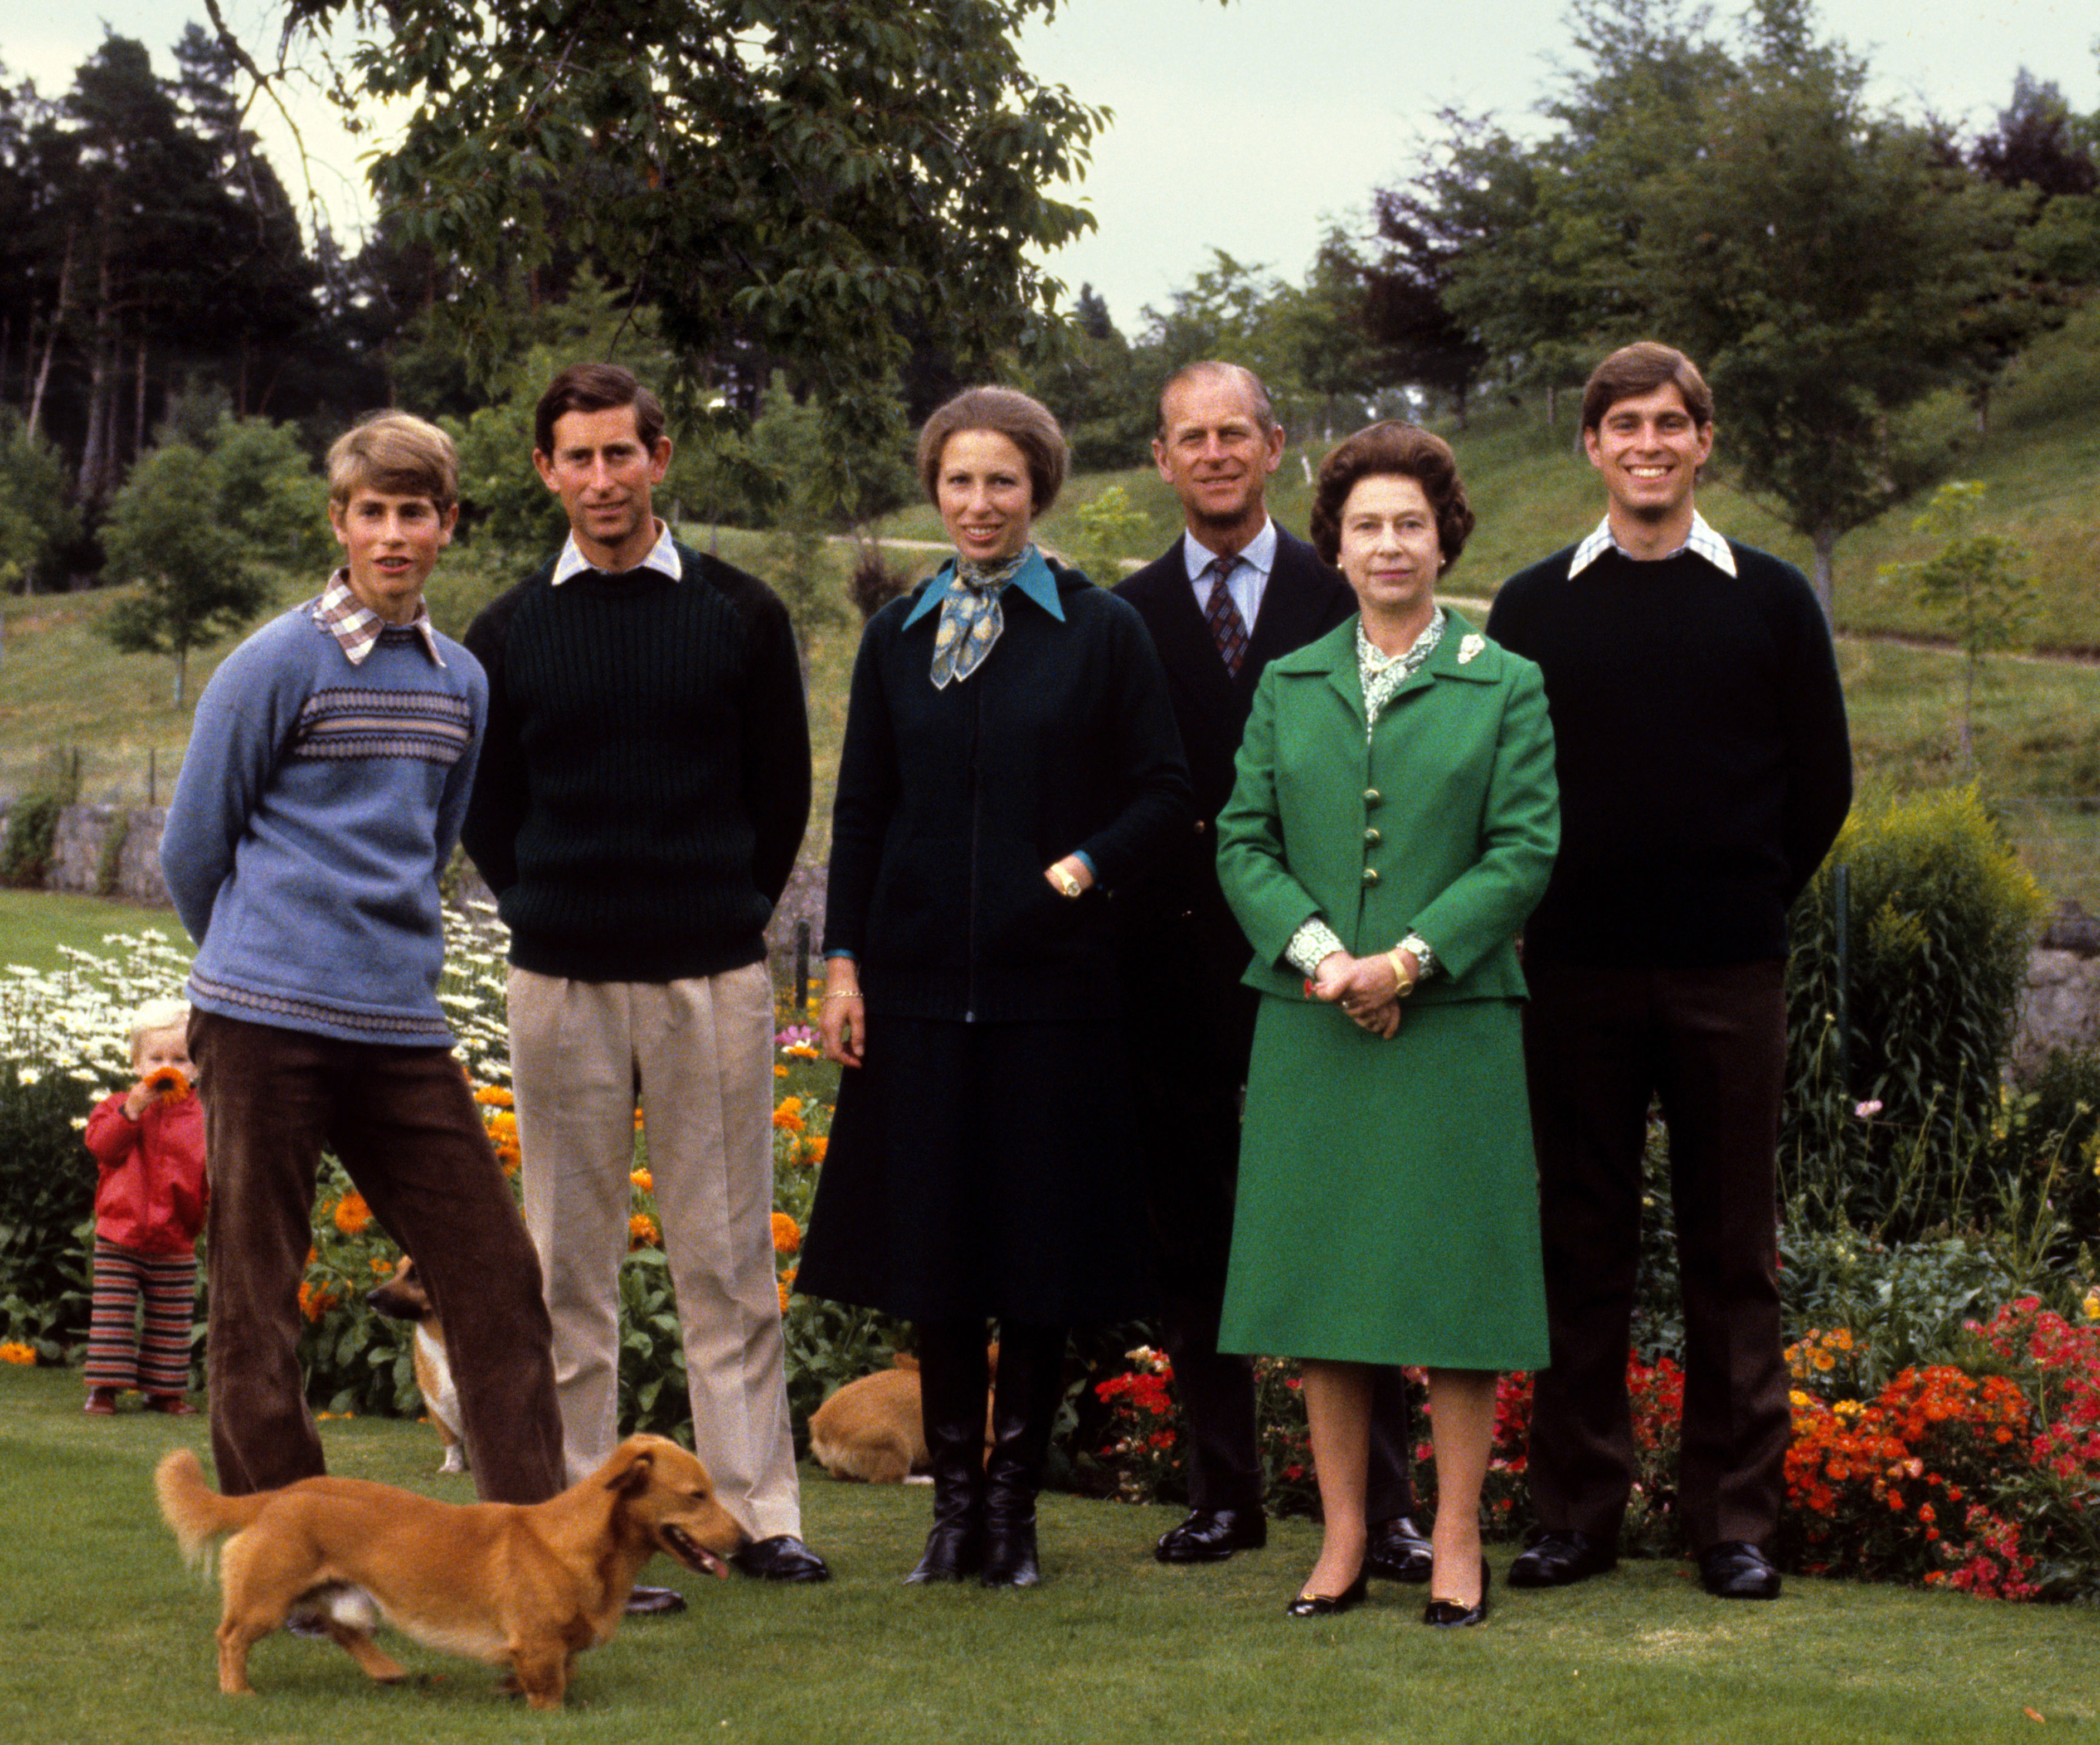 <p>Twenty years later in September 1979, Queen Elizabeth II and Prince Philip posed with their four children -- Prince Edward, Prince Charles, Princess Anne and Prince Andrew -- on her Balmoral Estate in Scotland.</p>